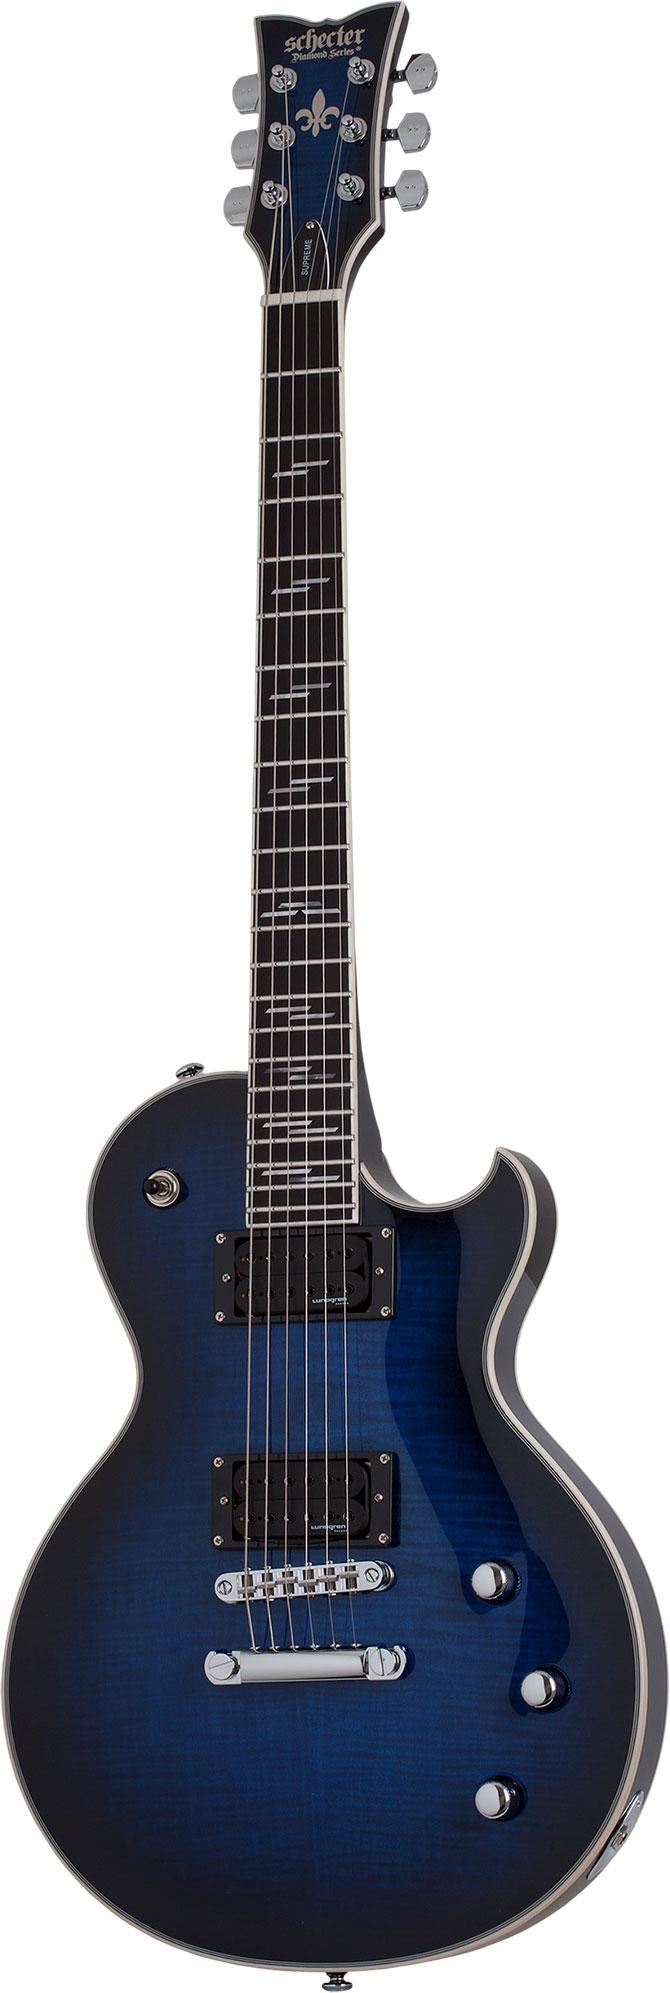 An image of Schecter Solo-II Supreme Trans Blue Burst